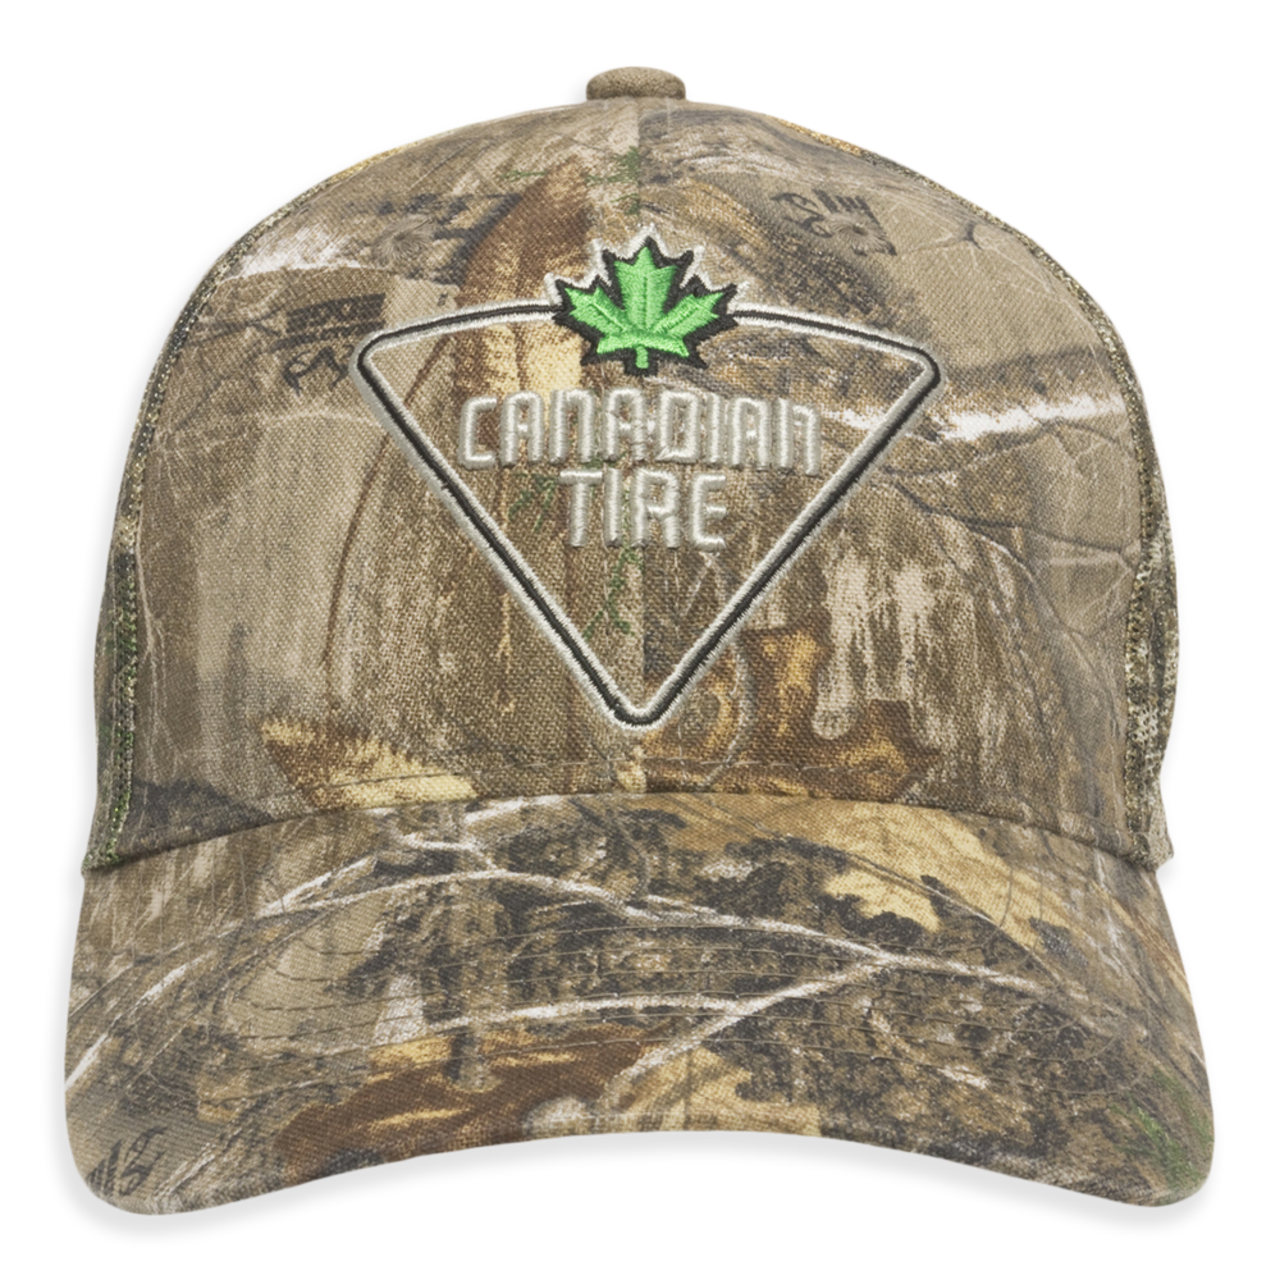 https://media-www.canadiantire.ca/product/playing/hunting/hunting-apparel-footwear/1759509/hat-canadian-tire-realtree-edge-345fa461-c47f-47f6-b1d2-8454613d090a.png?imdensity=1&imwidth=640&impolicy=mZoom